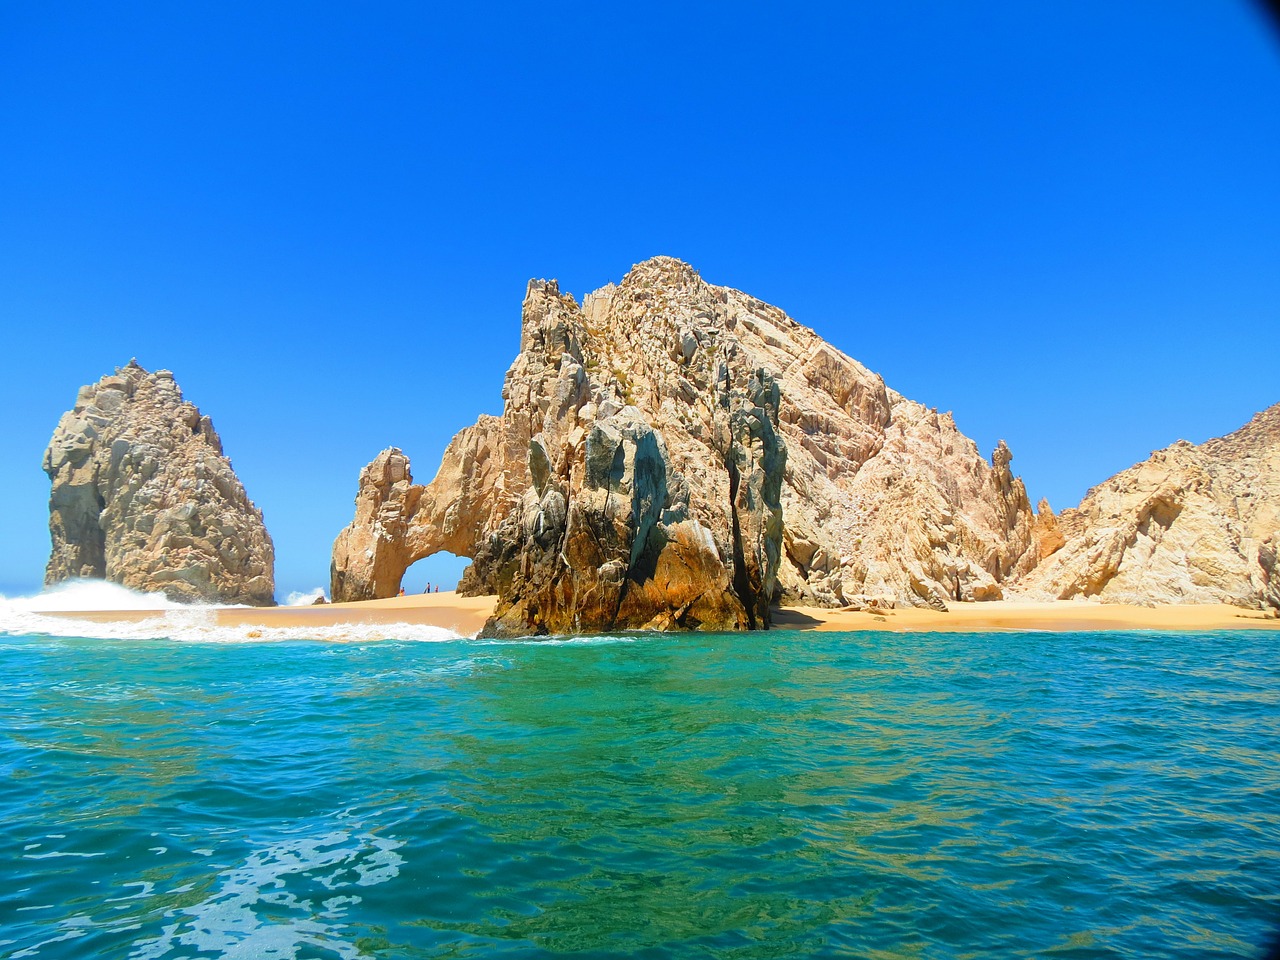 a large rock formation on a beach with Arch of Cabo San Lucas in the background